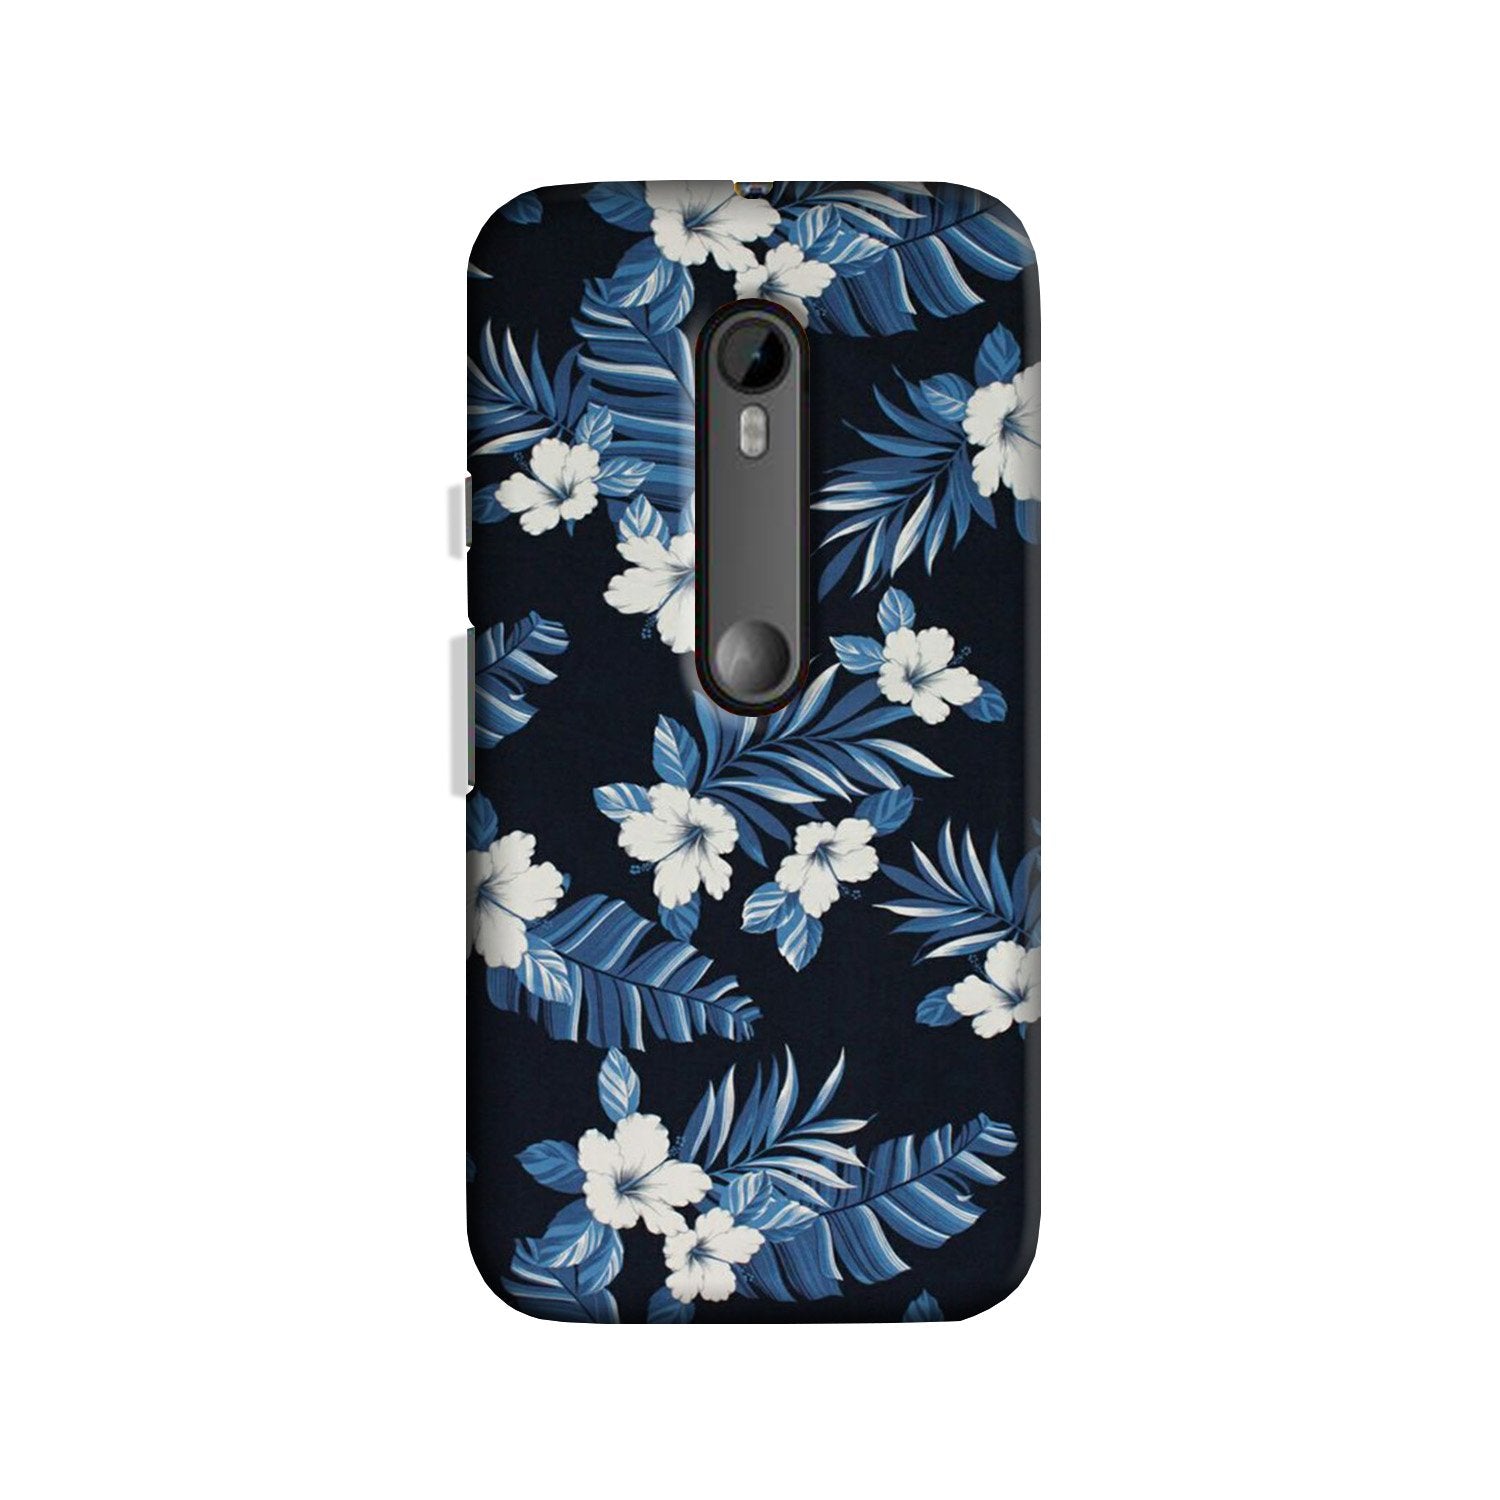 White flowers Blue Background2 Case for Moto X Force